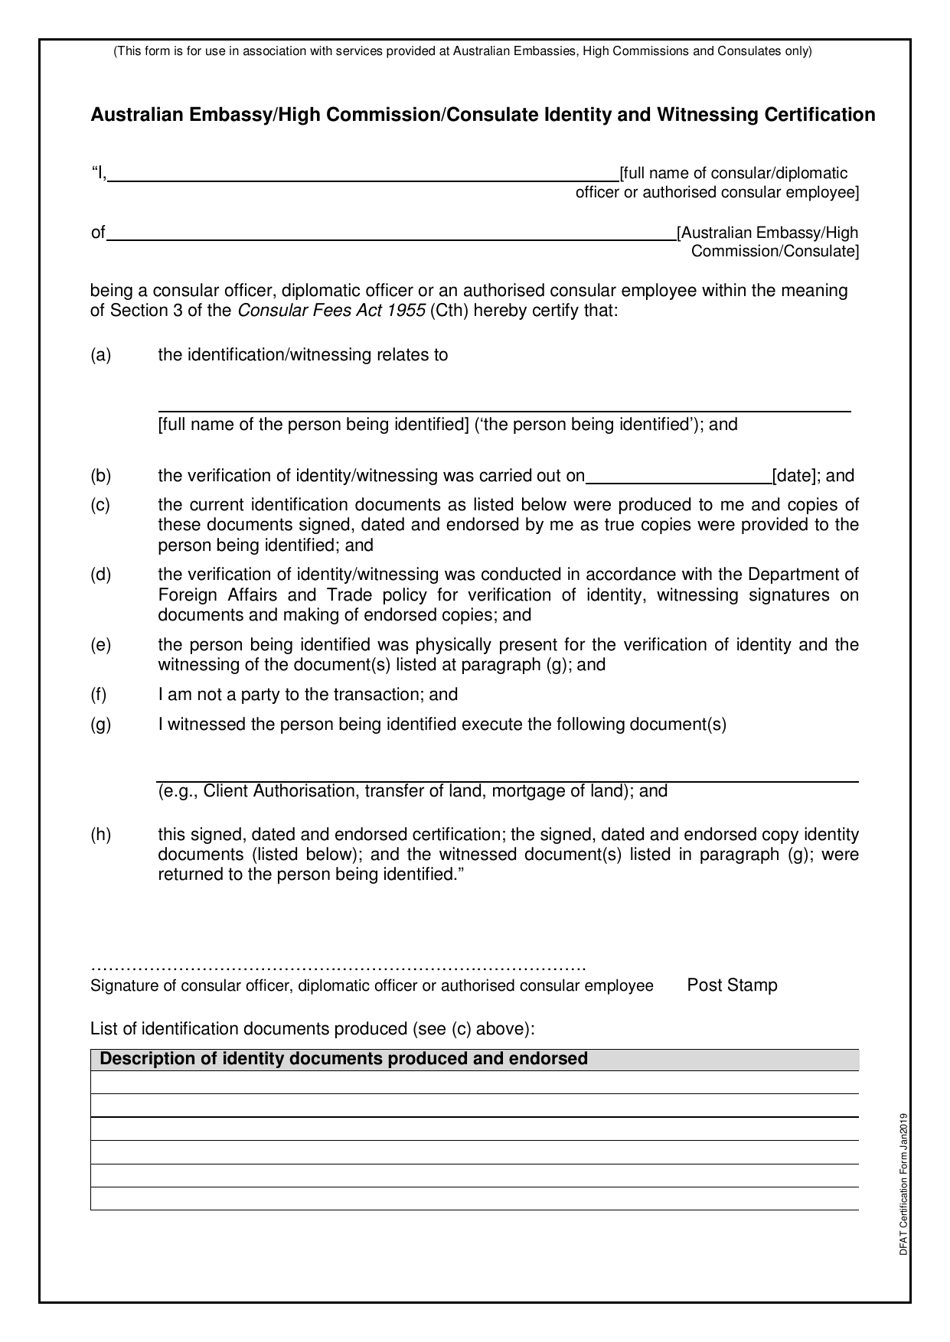 Australian Embassy / High Commission / Consulate Identity and Witnessing Certification - Australia, Page 1